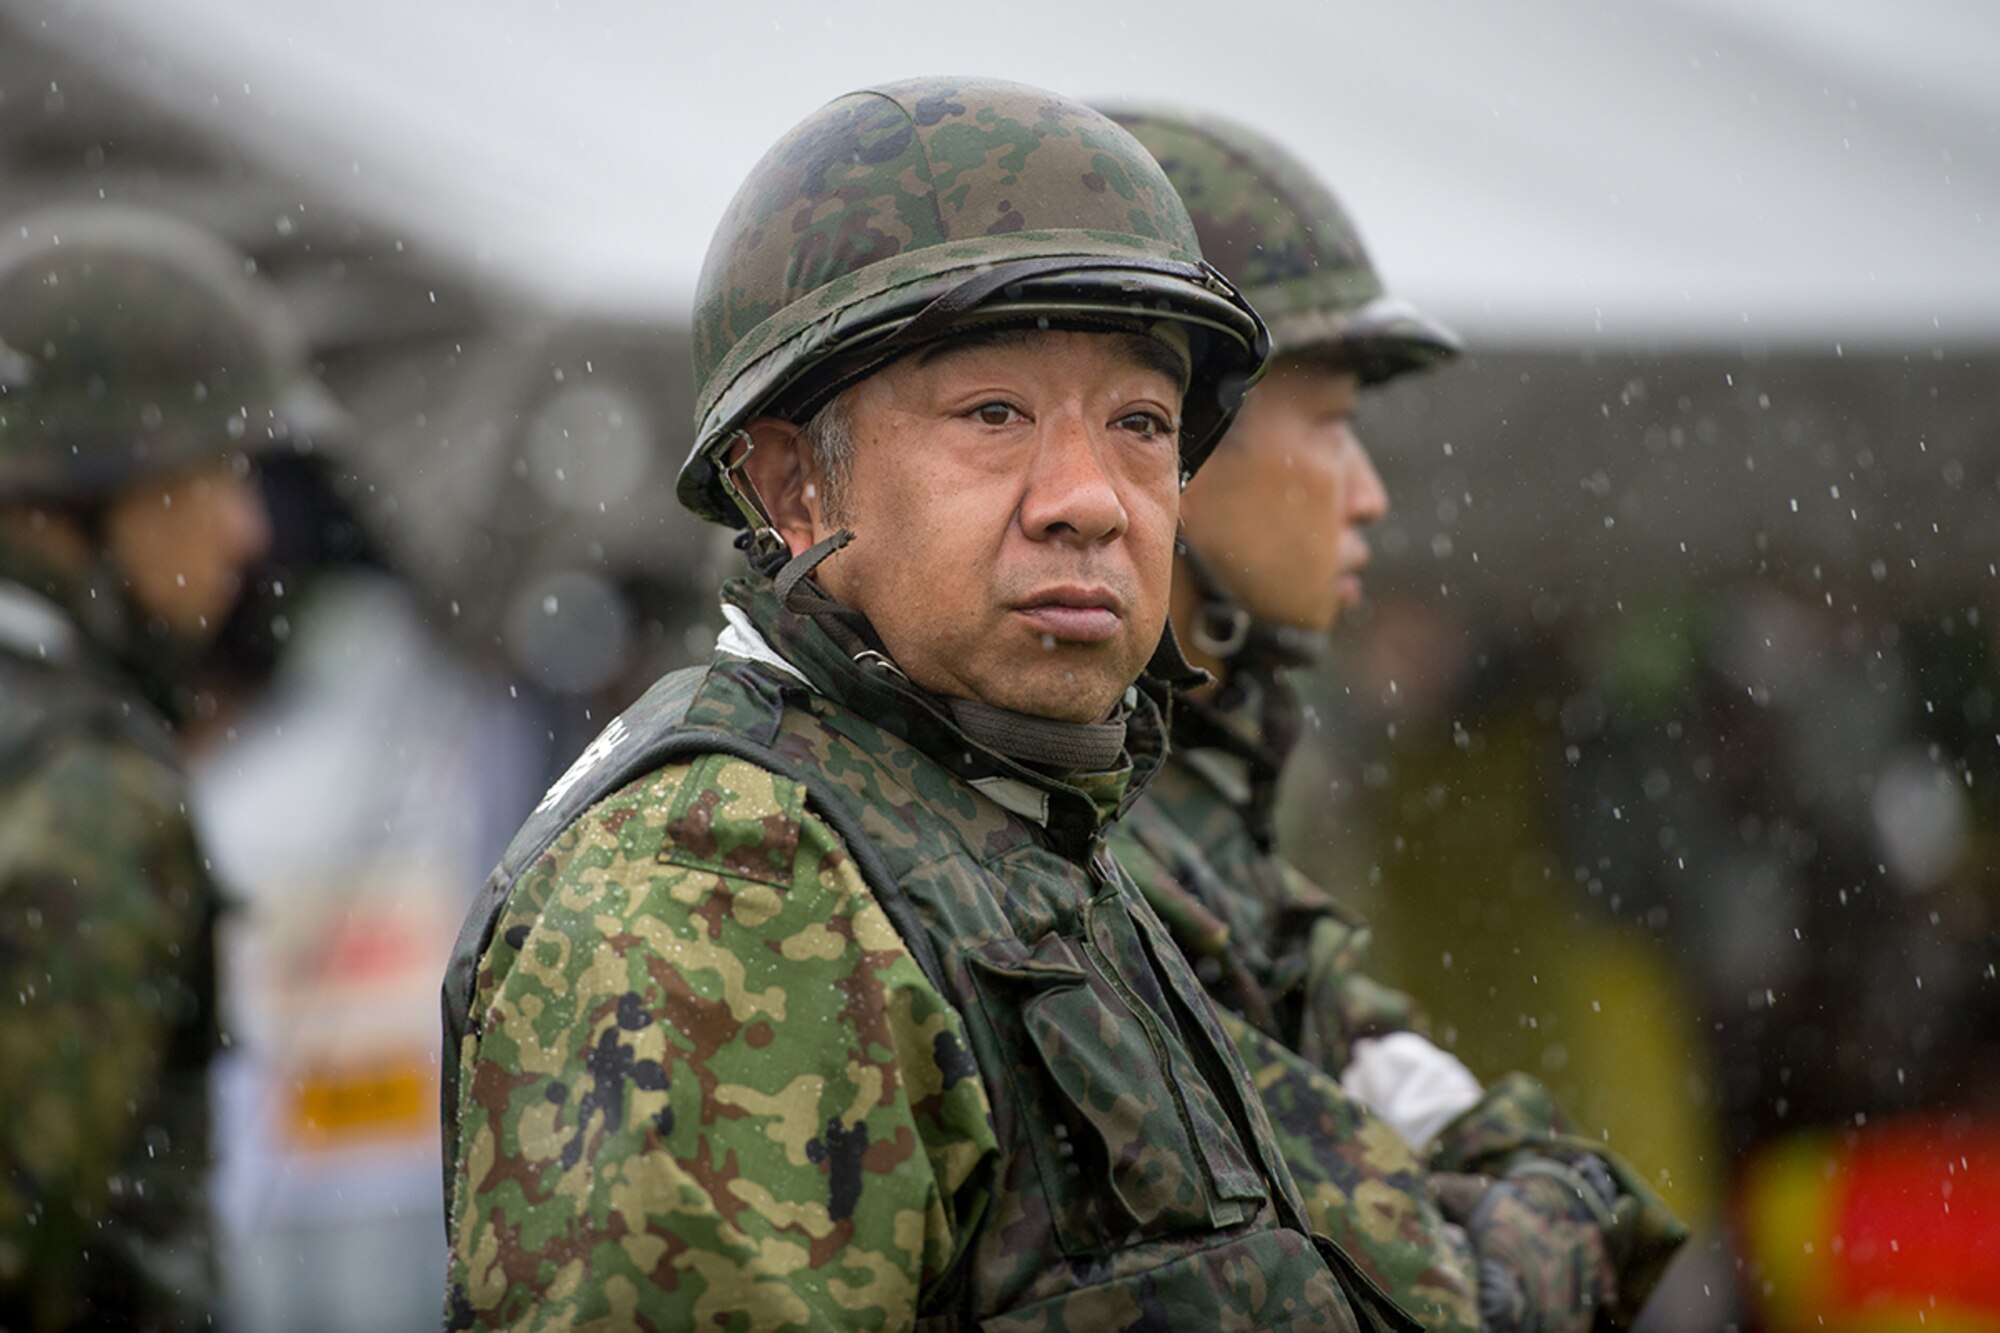 A Japan Ground Self-Defense Force soldier participates in a simulated emergency during the Kanagawa Prefecture Government Joint Disaster Drill at JGSDF Camp Takeyama, Sept. 11, 2016. Members of the U.S. Armed Forces, Japan Self-Defense Force and local emergency response teams spent the day working side-by-side, responding to various simulated disaster scenarios. (U.S. Air Force photo by Senior Airman Delano Scott/Released)